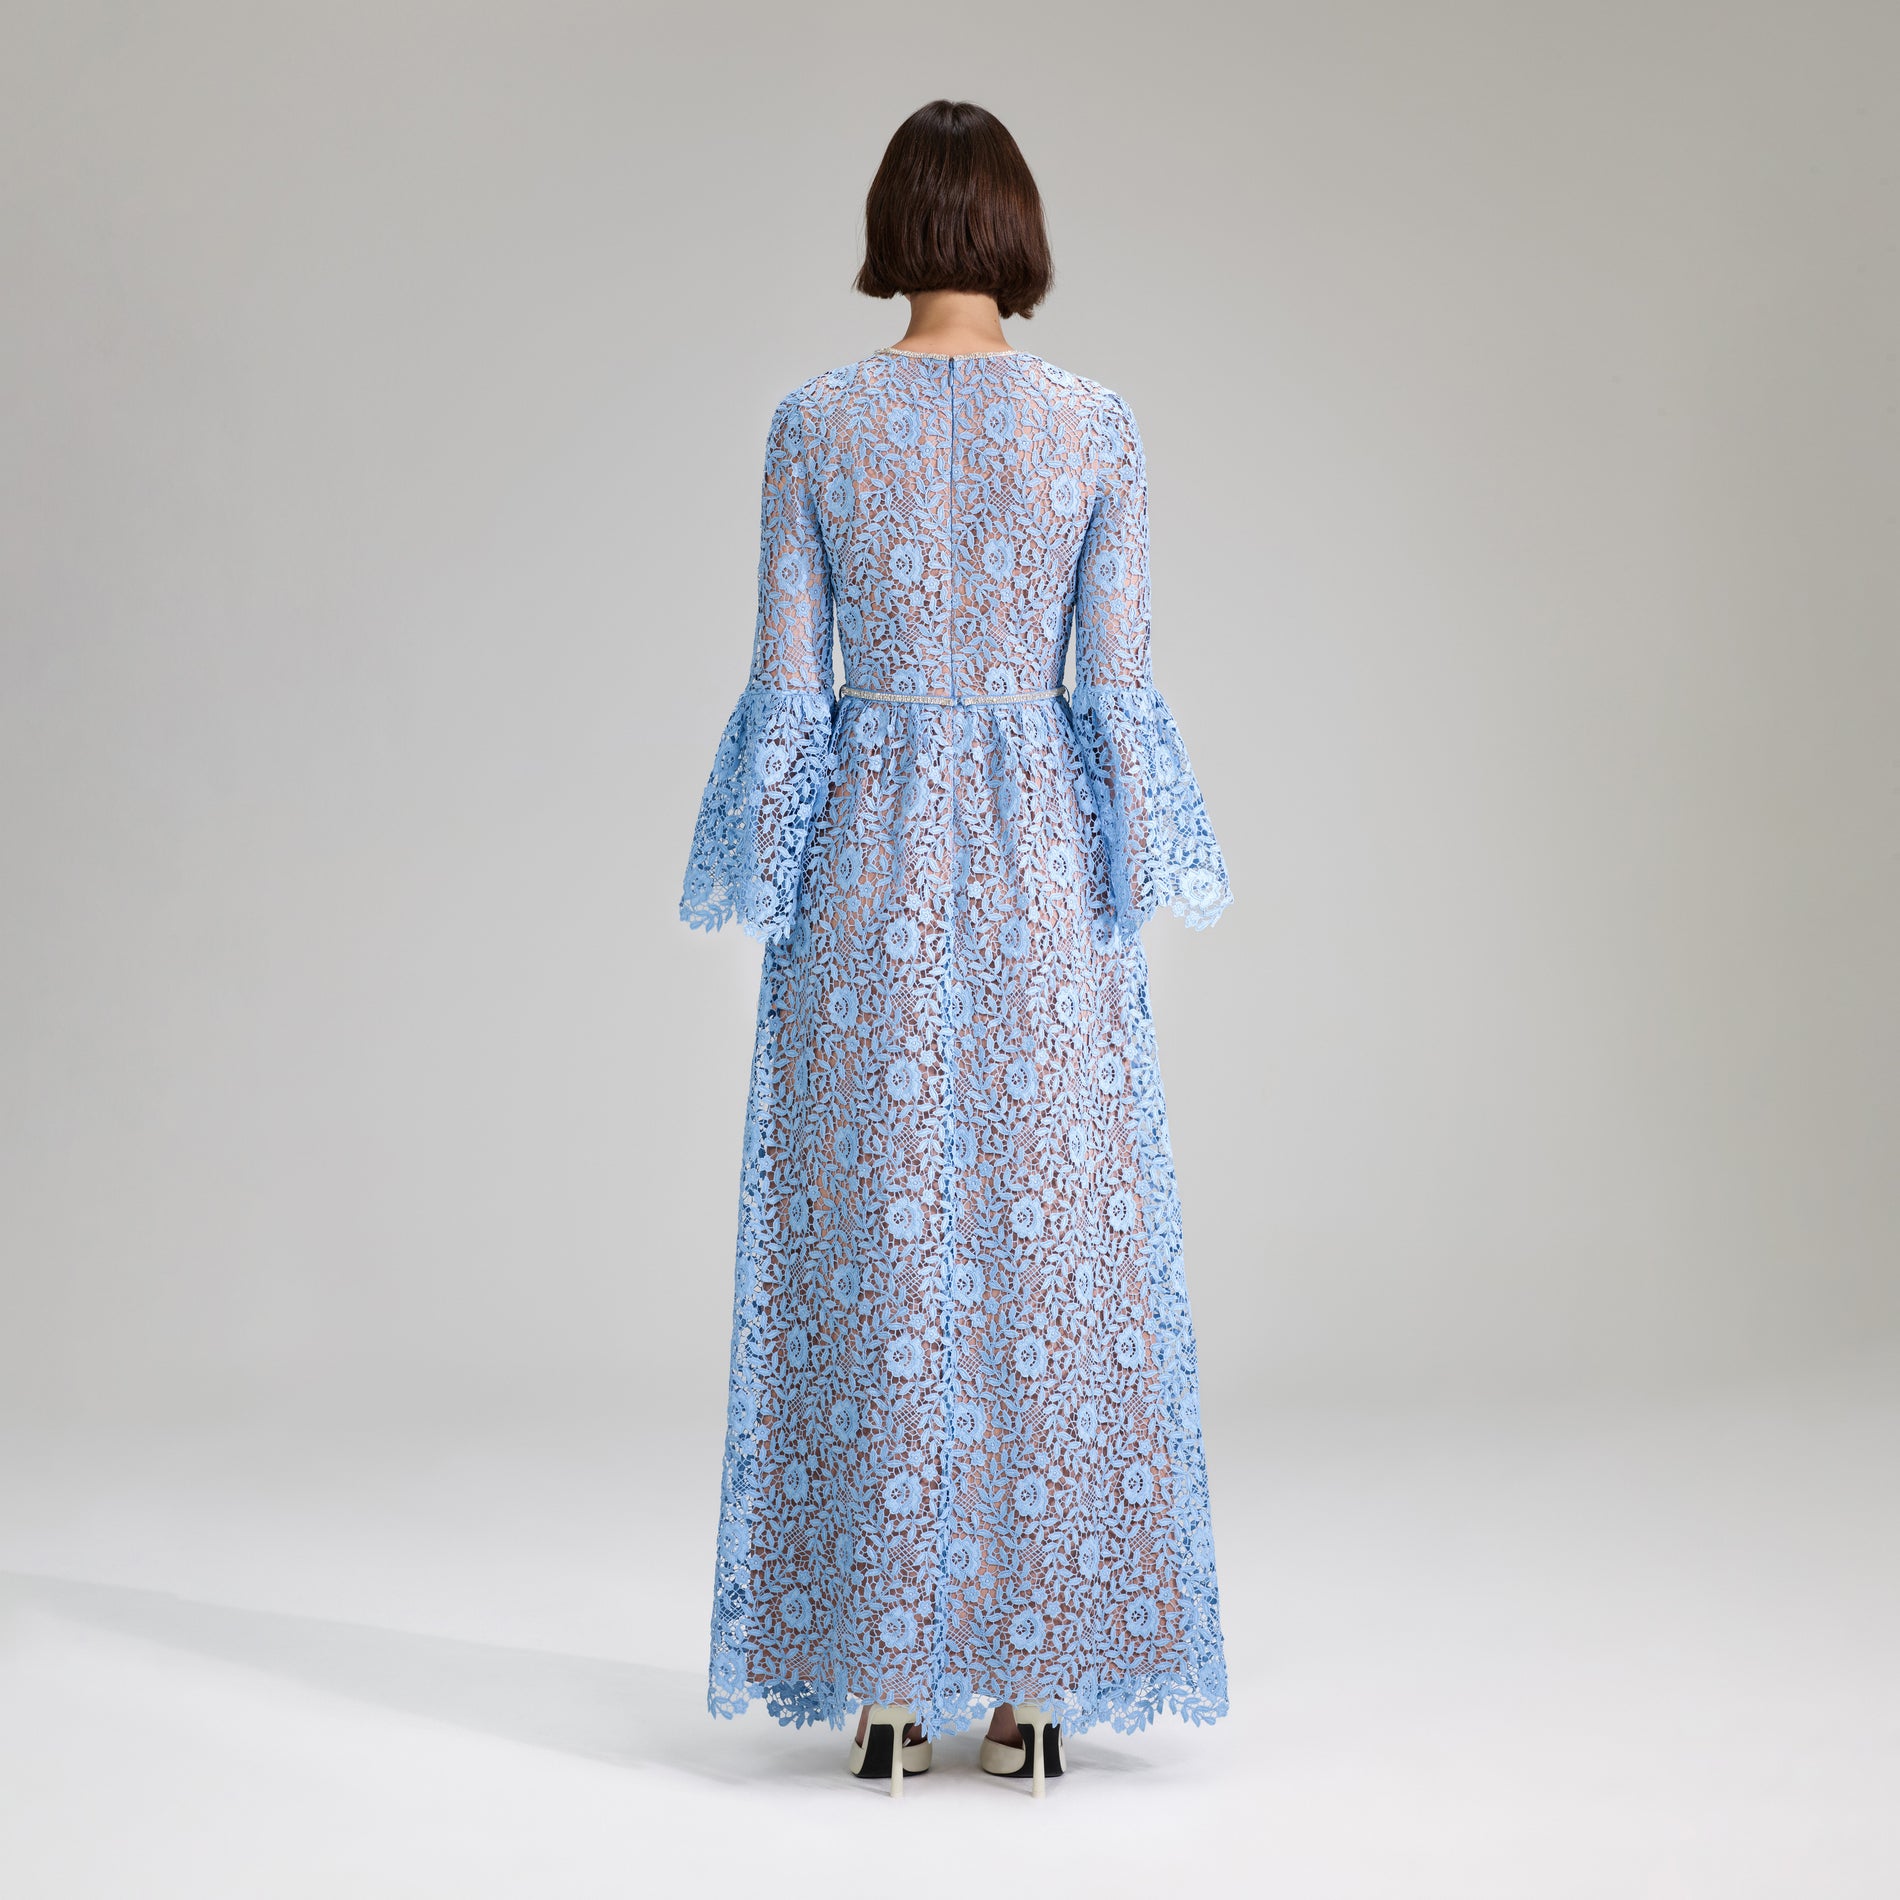 A woman wearing the Blue Rose Lace Maxi Dress